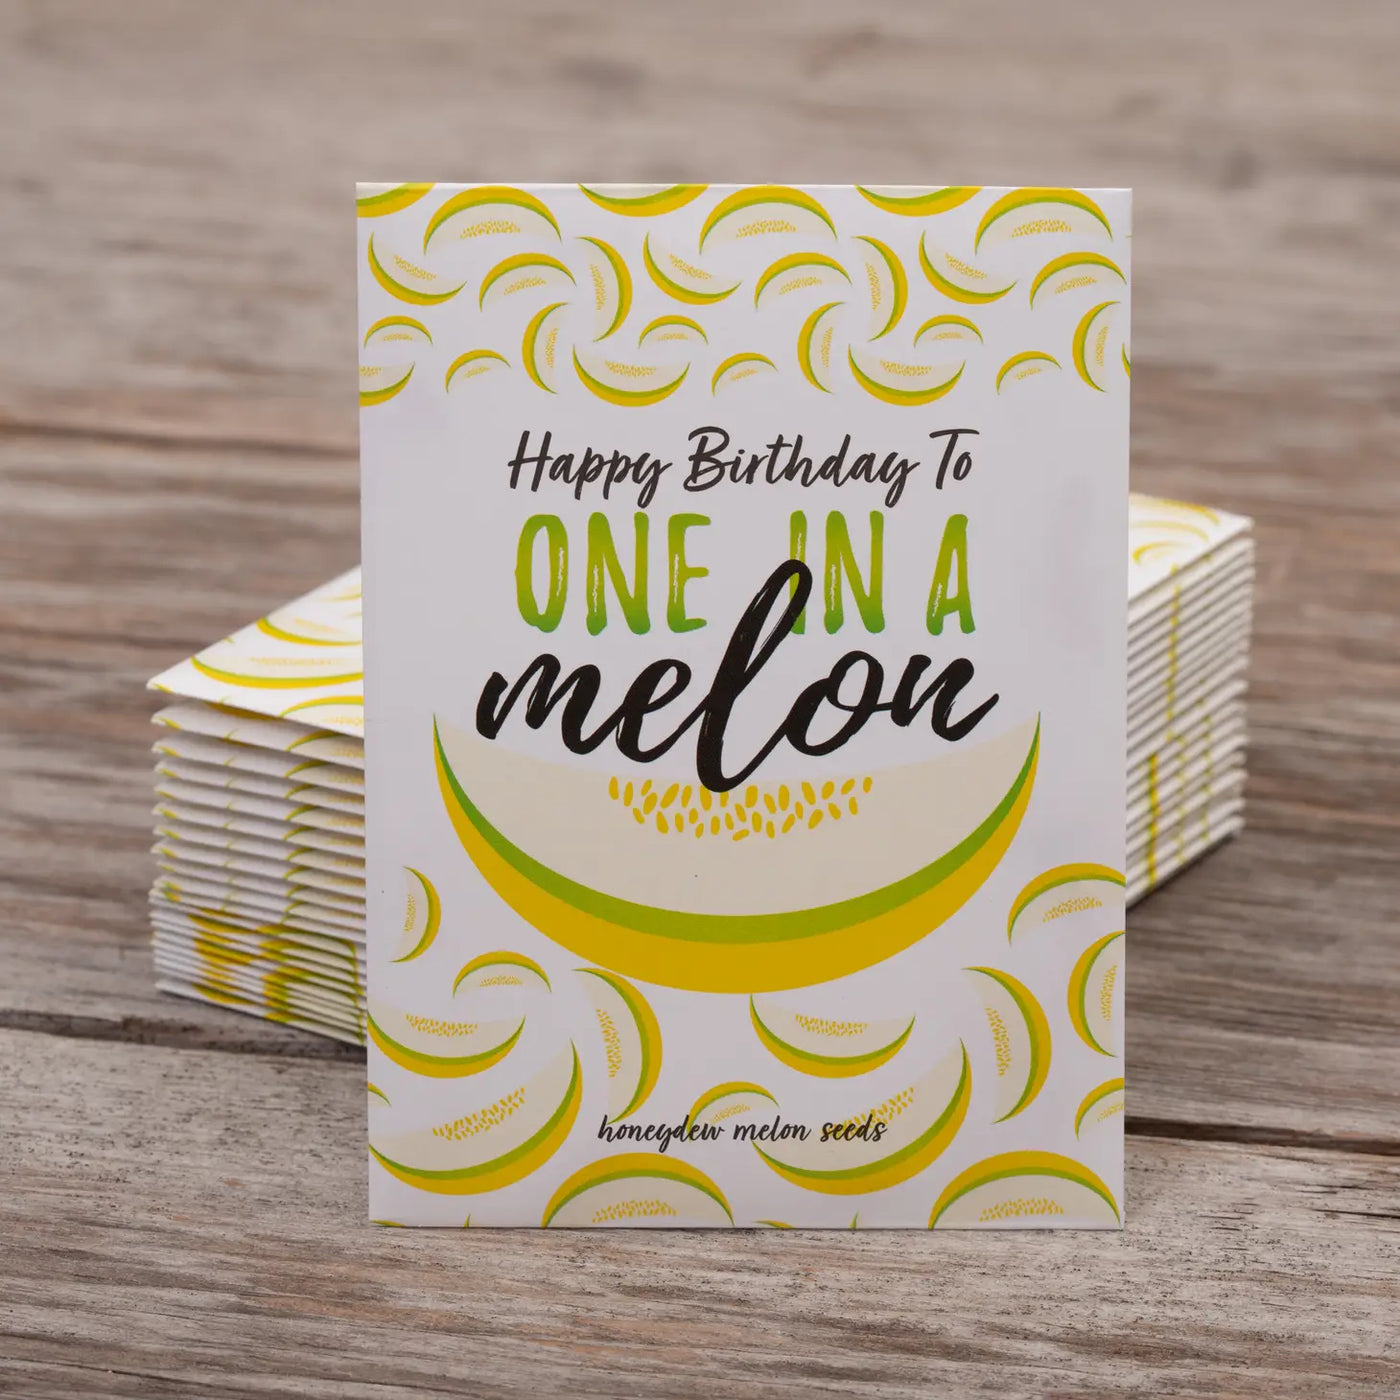 Melon, Honey Dew Seed Packets